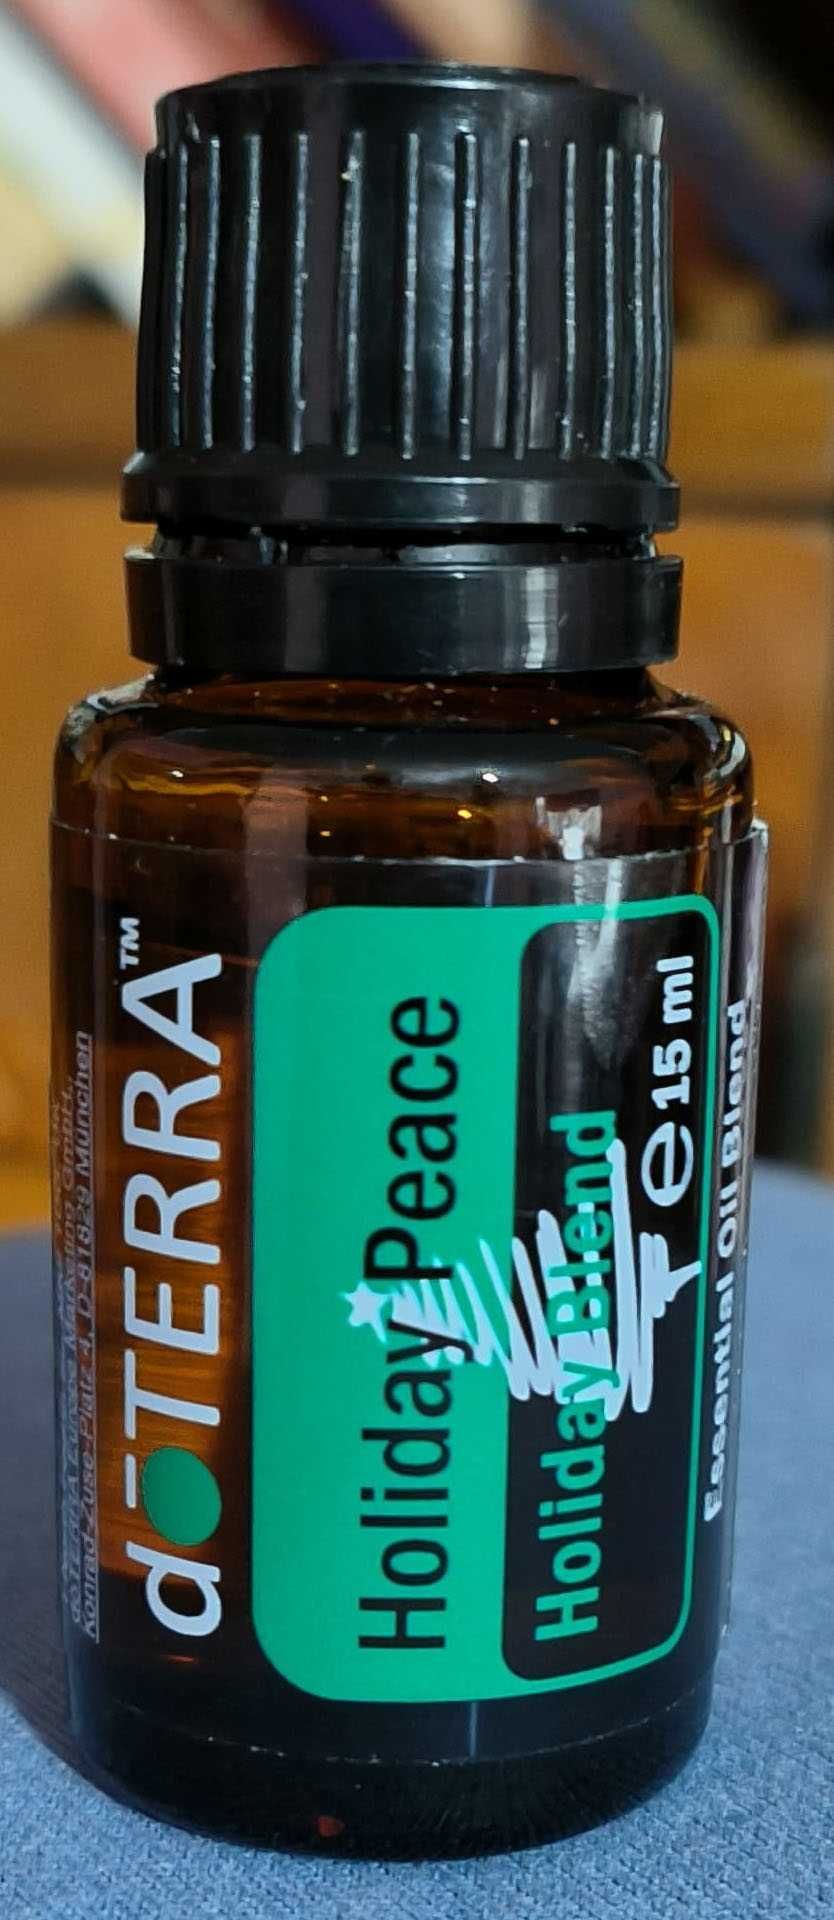 Vand ulei esential doTerra Holiday Peace